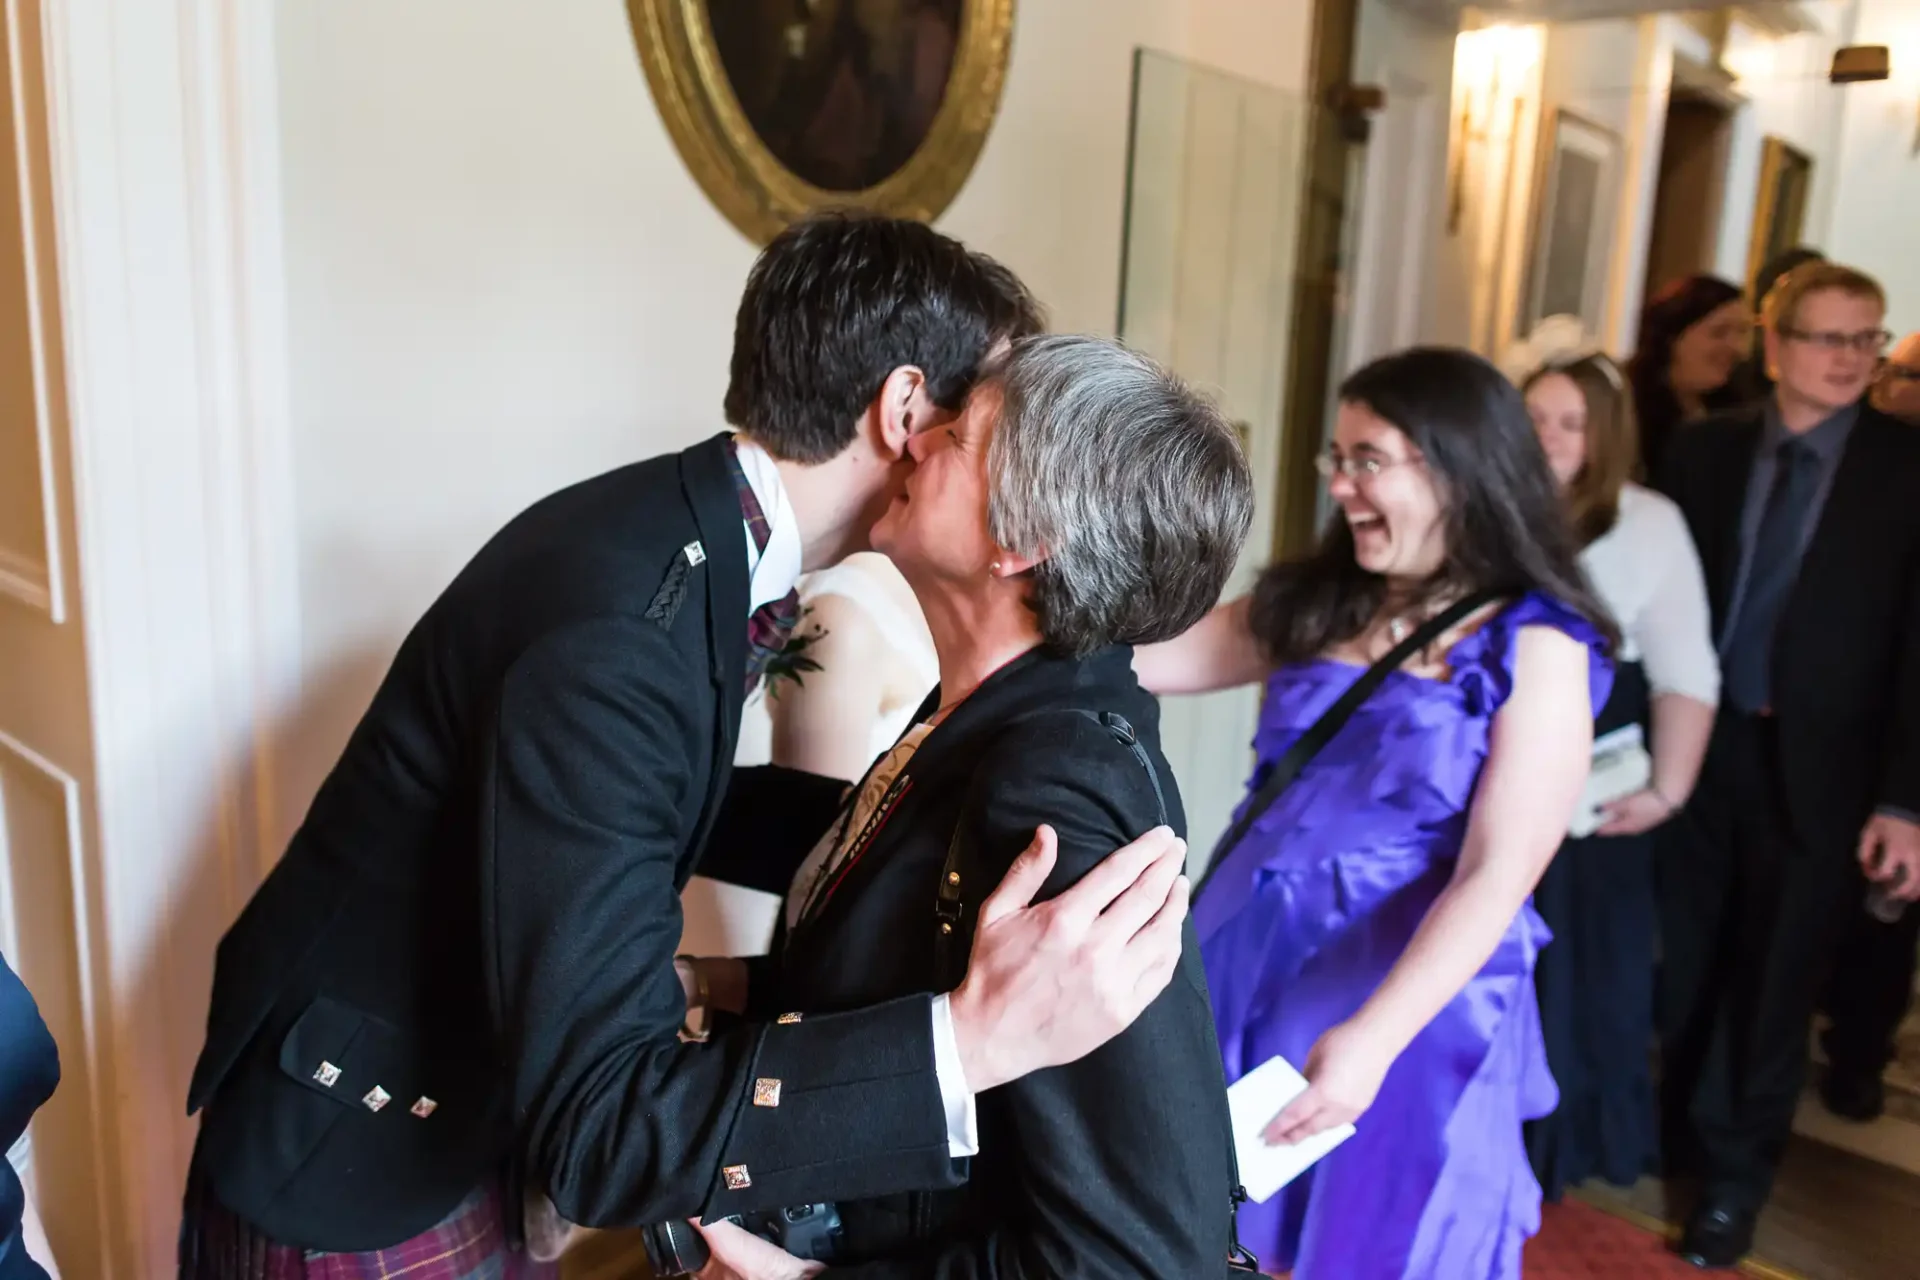 A couple in formal attire kissing each other on the cheek during a wedding ceremony, surrounded by smiling guests.